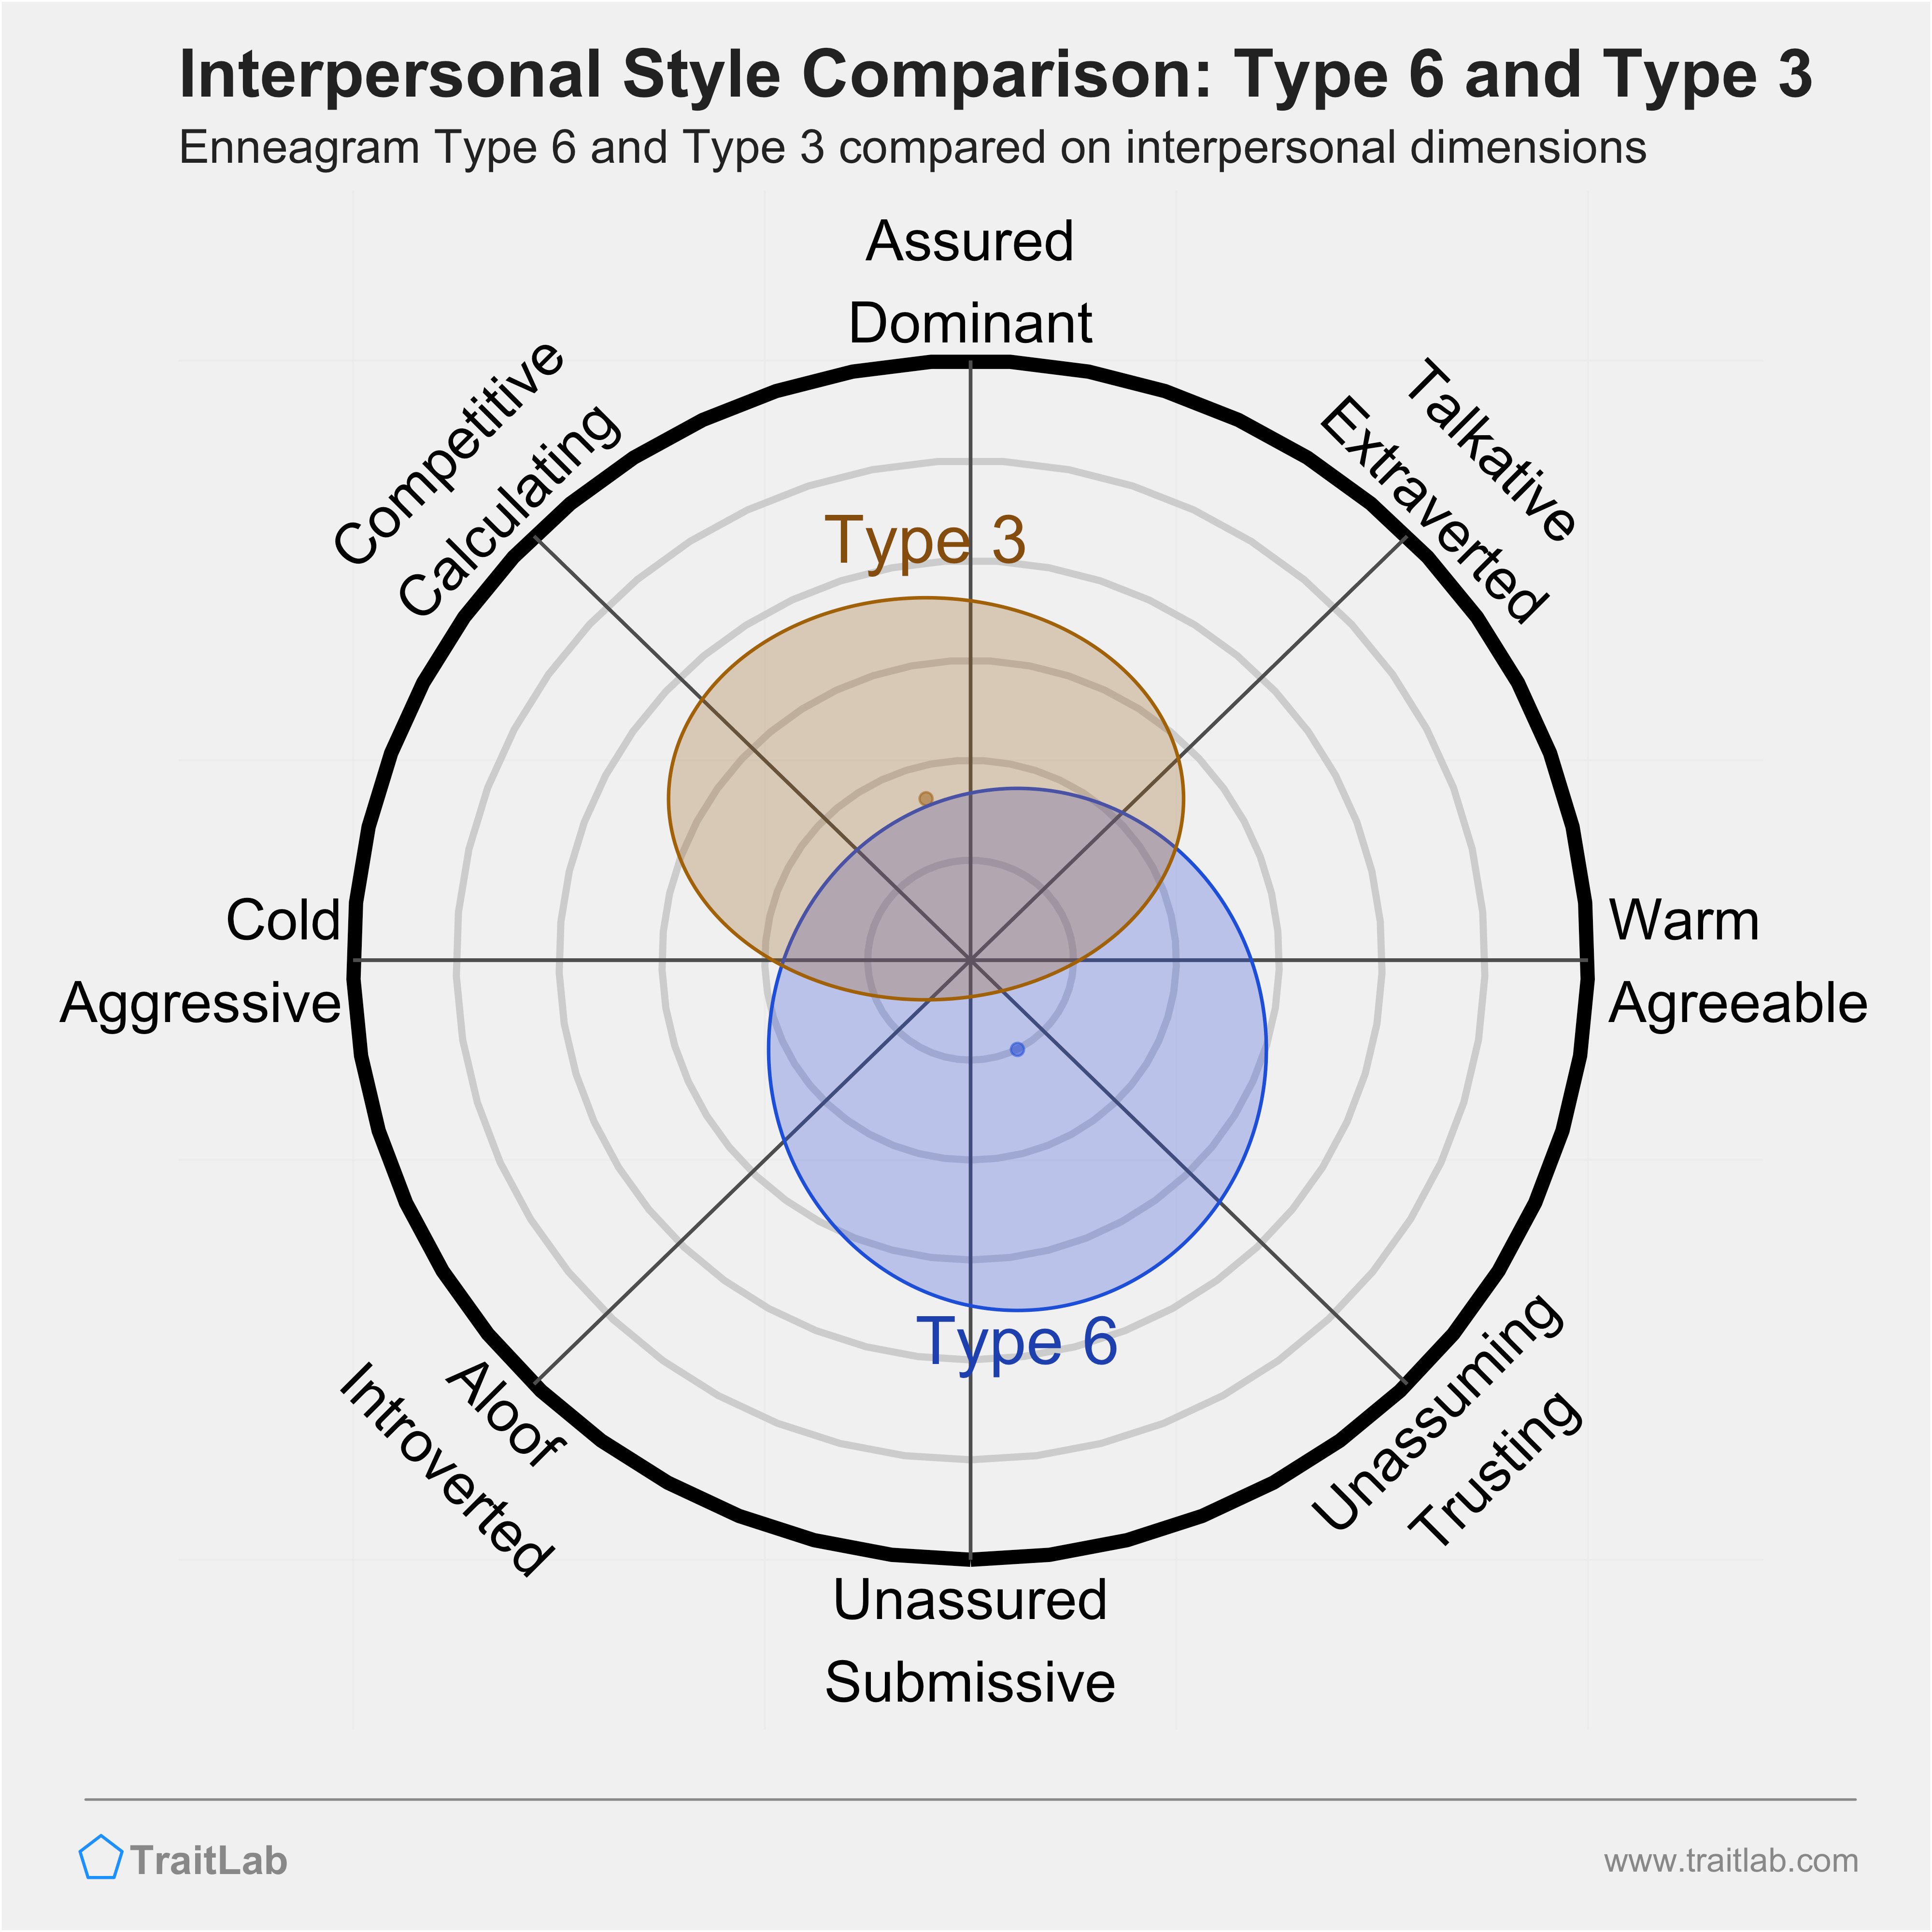 Enneagram Type 6 and Type 3 comparison across interpersonal dimensions